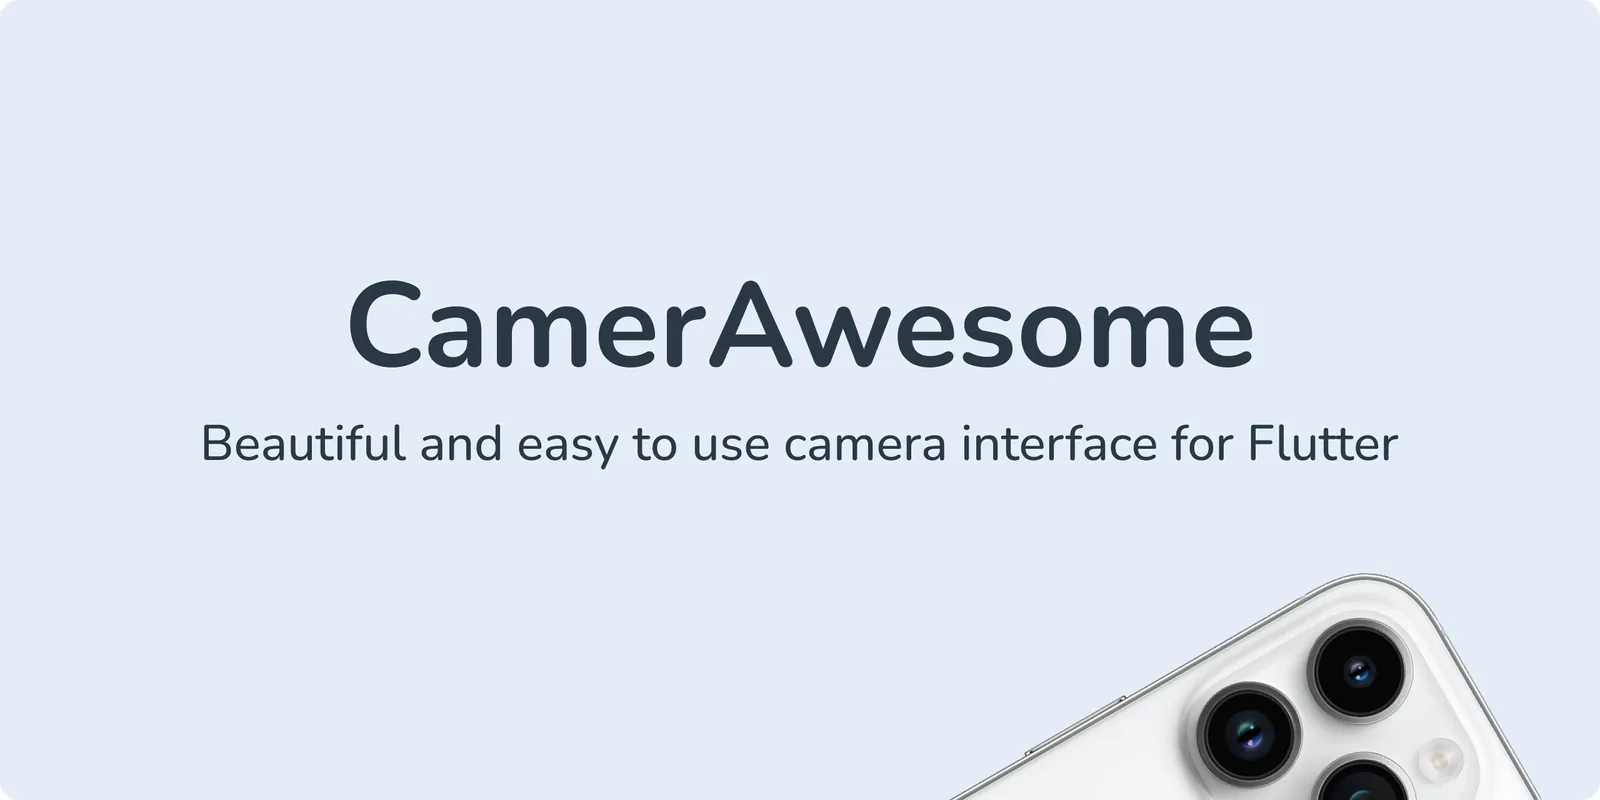 Easiest Flutter Camera Plugin with Builtin UI. Supporting Capturing Images,Streaming Image